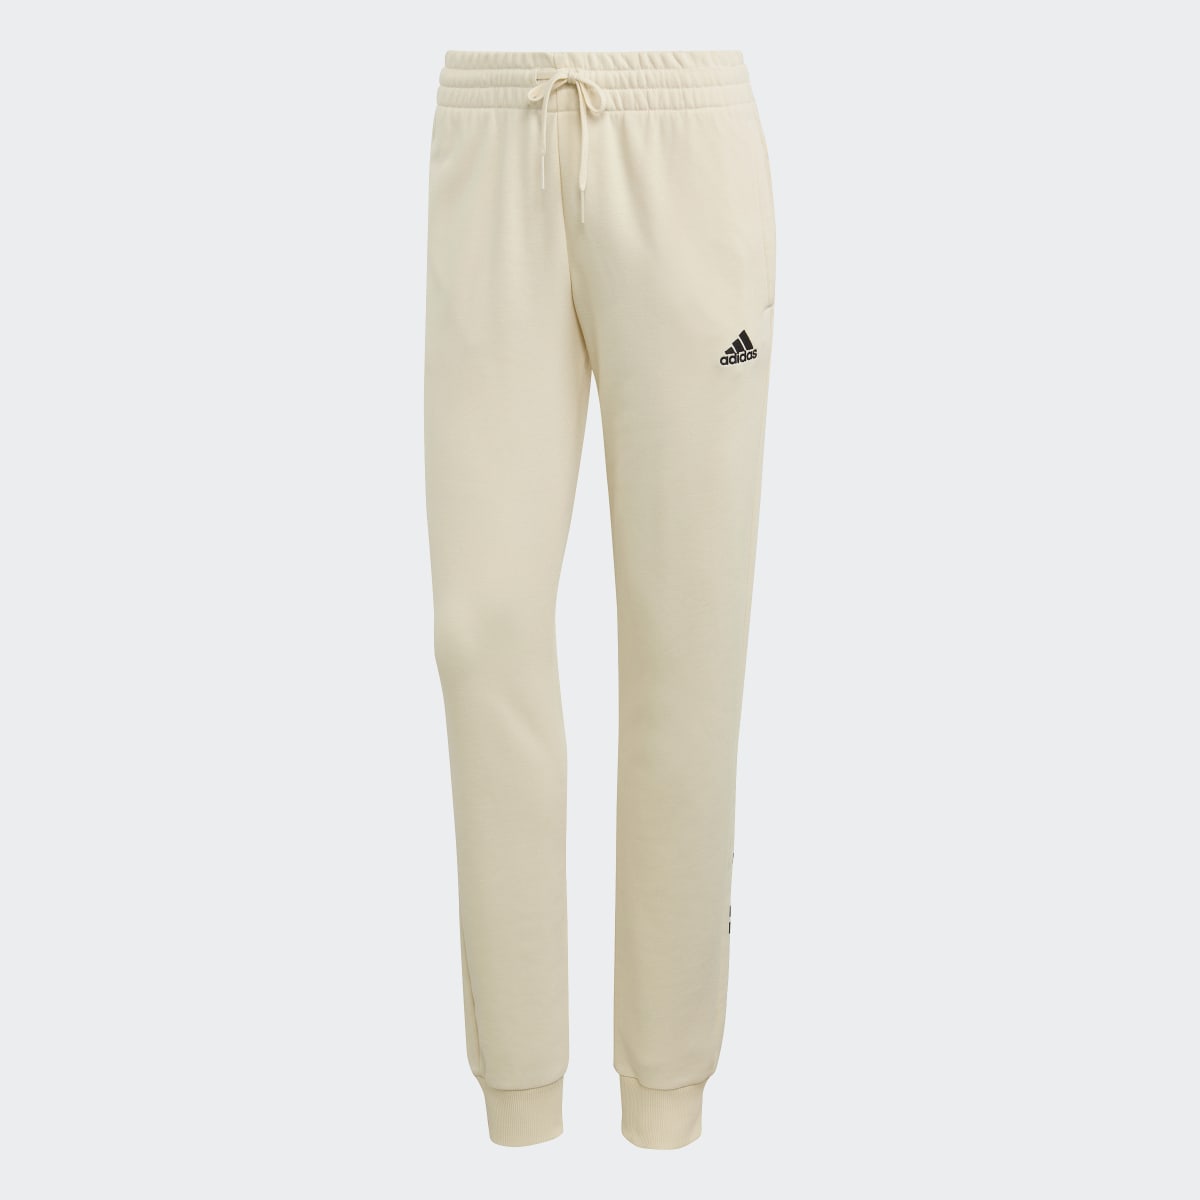 Adidas Essentials French Terry Logo Pants. 4